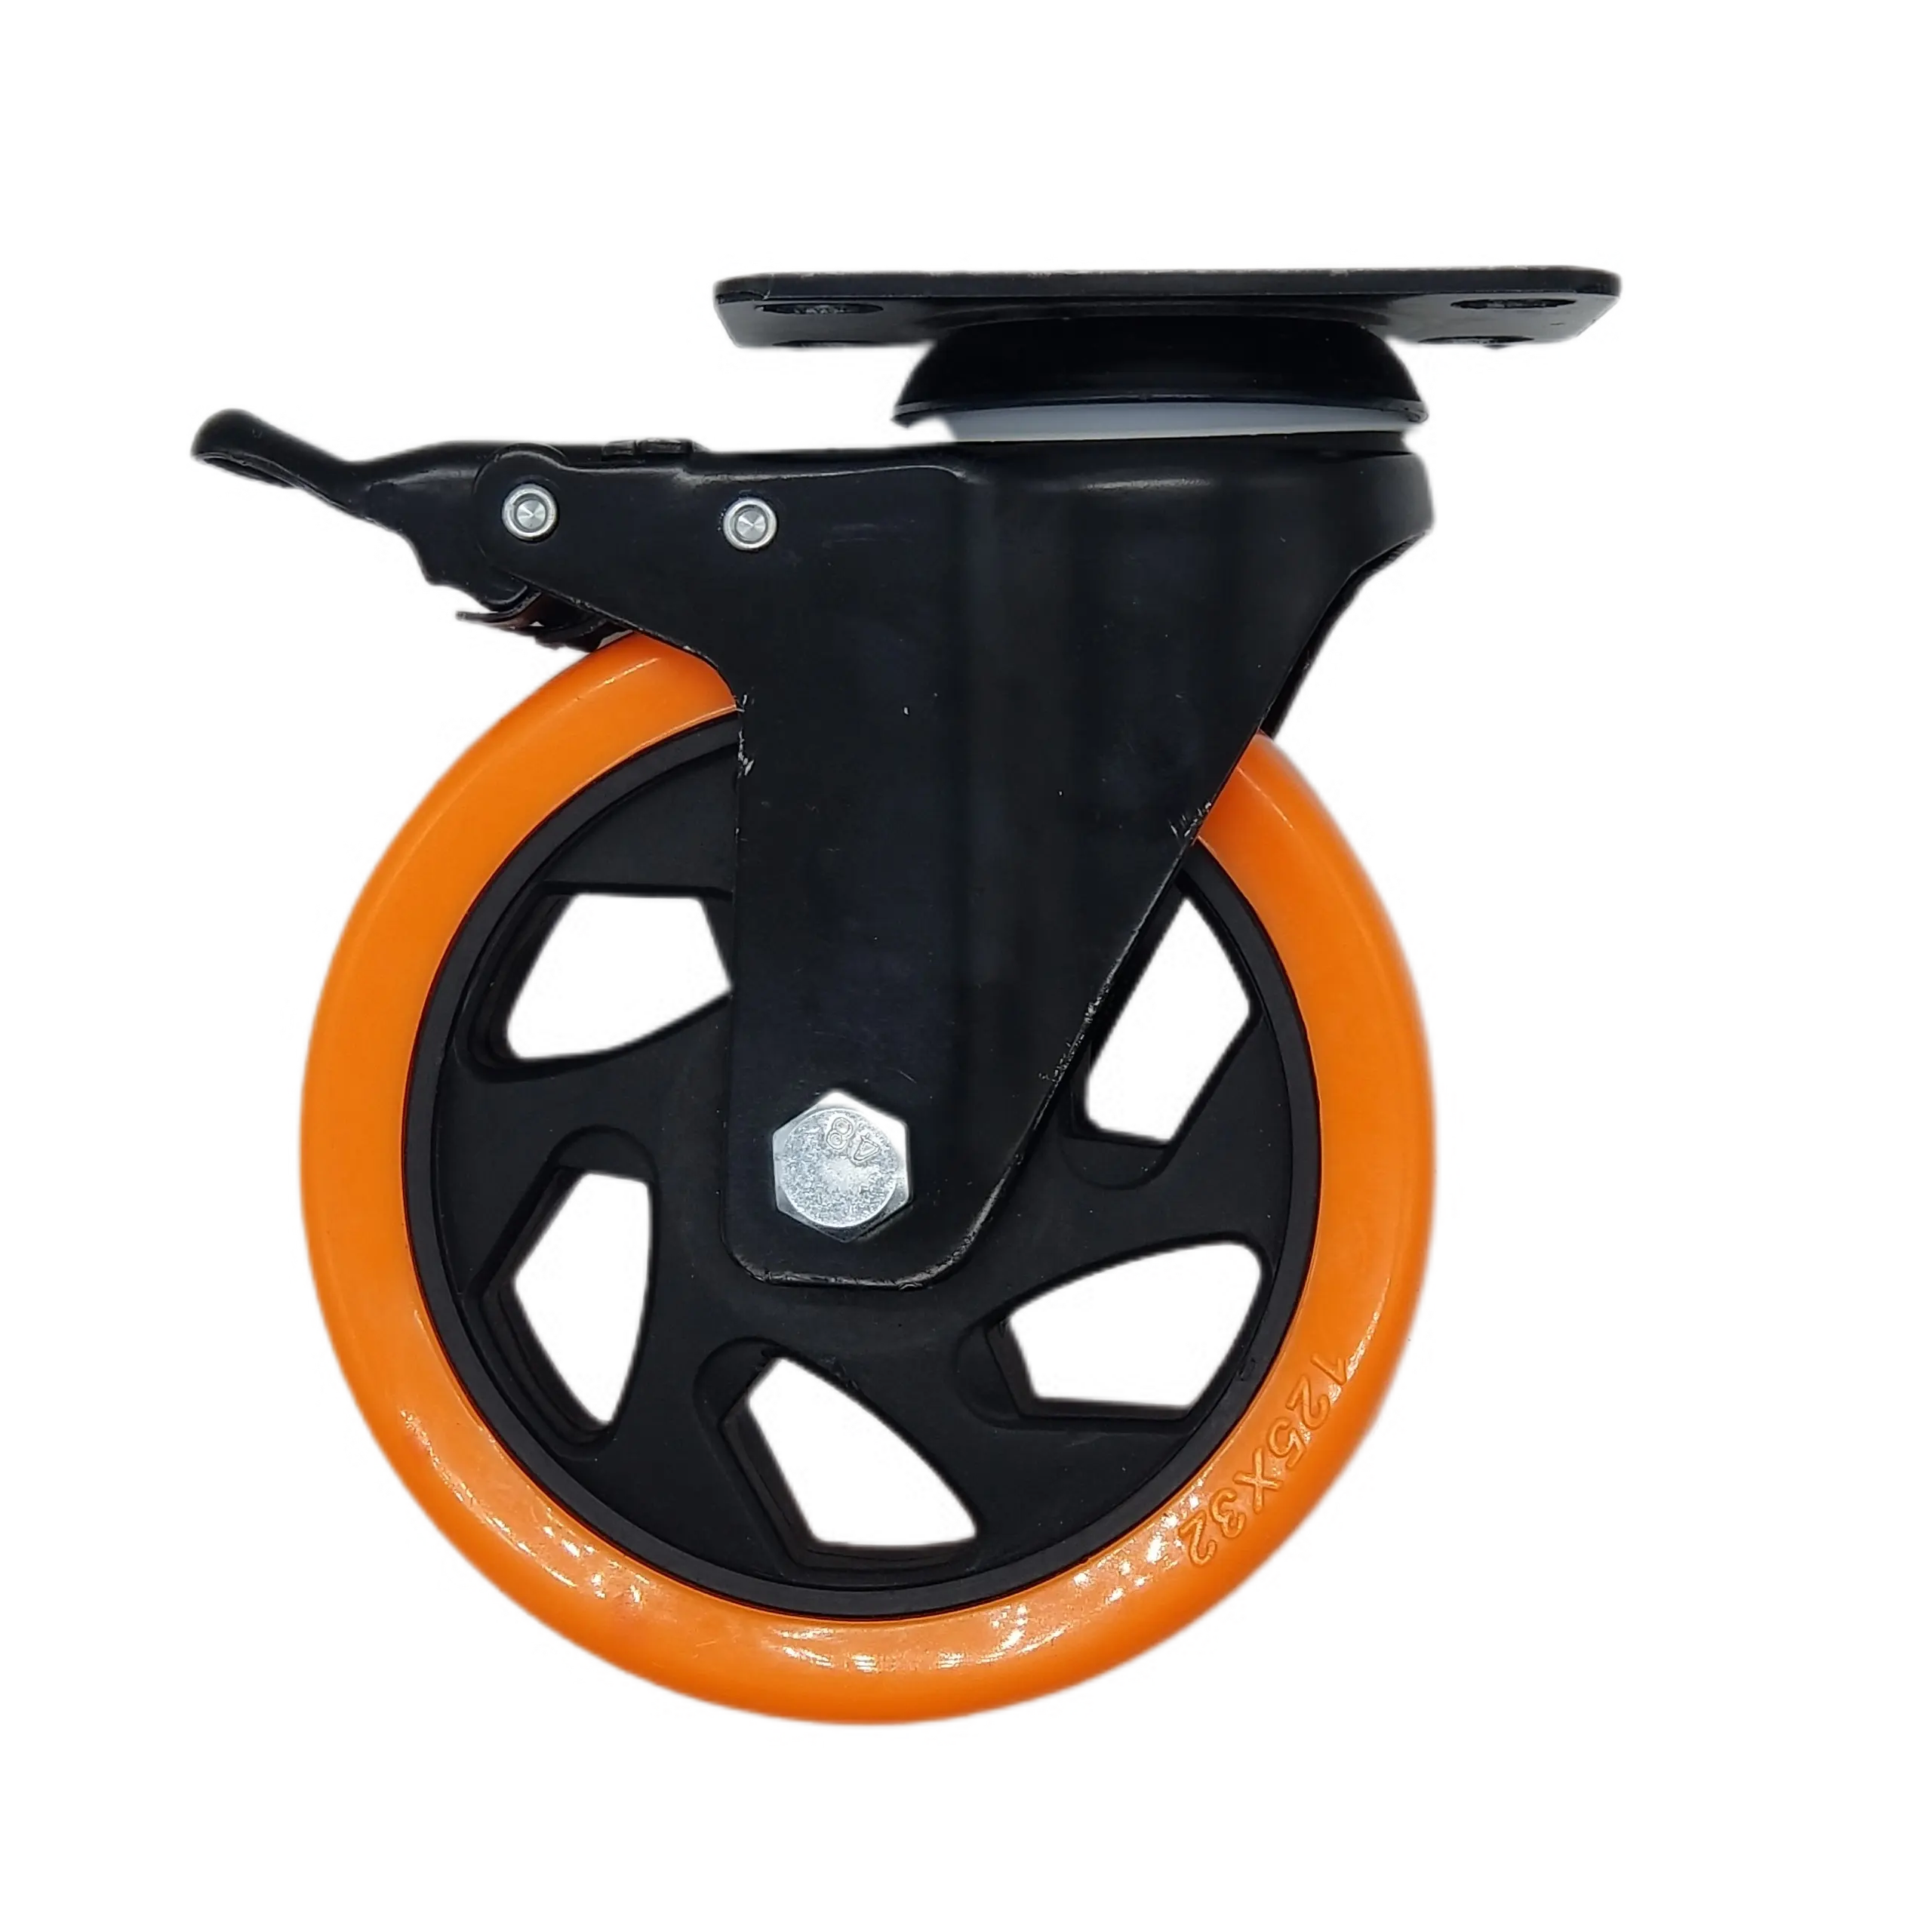 Factory SuPPly 4 Inch Flat Bottom Universal Brake Orange Adapter 360 Degree Caster For Move Furniture